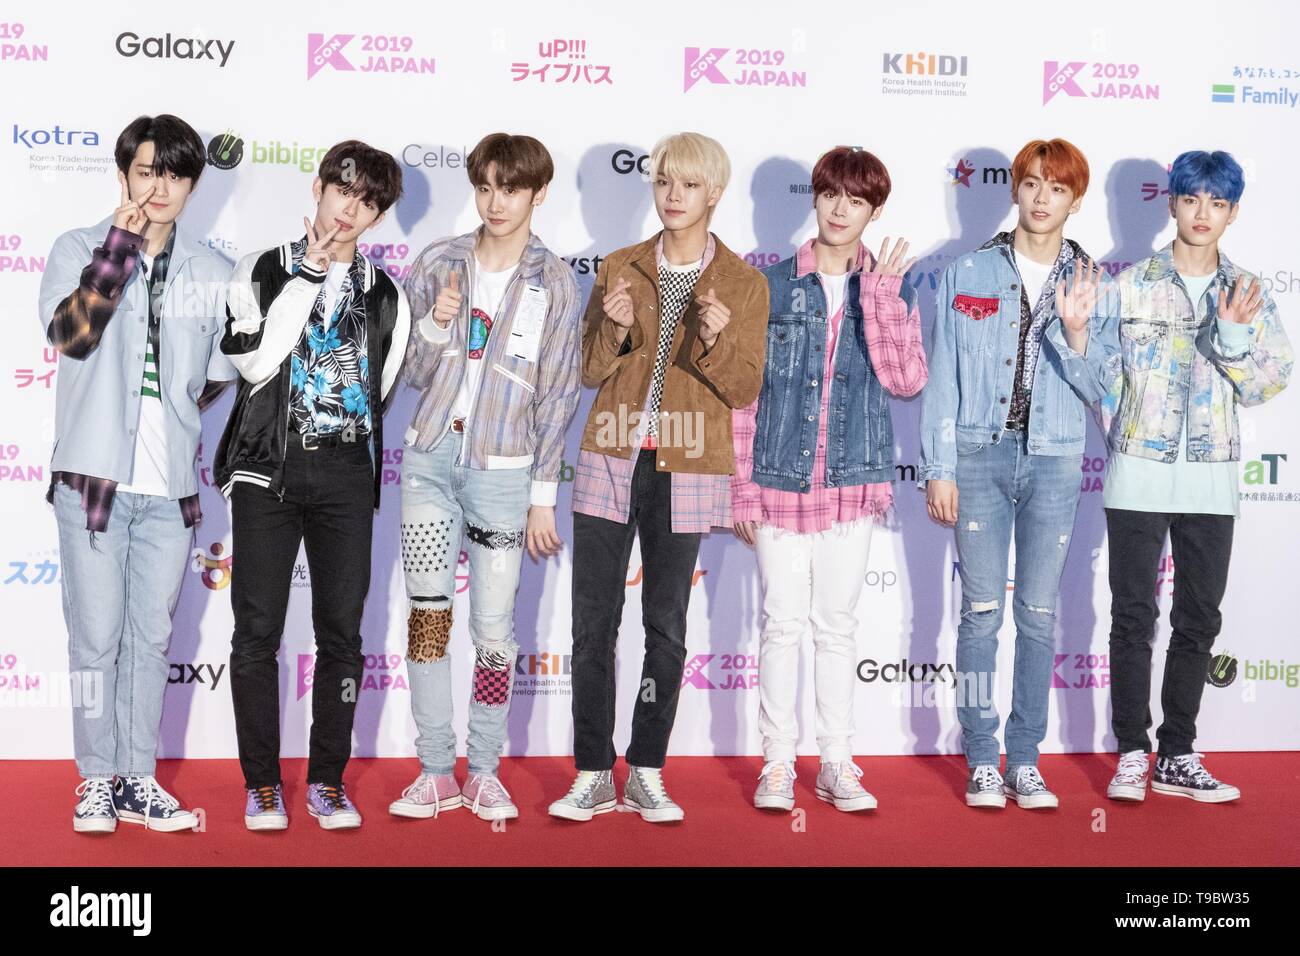 May 18, 2019 - Chiba, Japan - Members of the South Korean boy group  Verivery pose for the cameras during a red carpet for the KCON 2019 Japan  in Makuhari Messe Convention